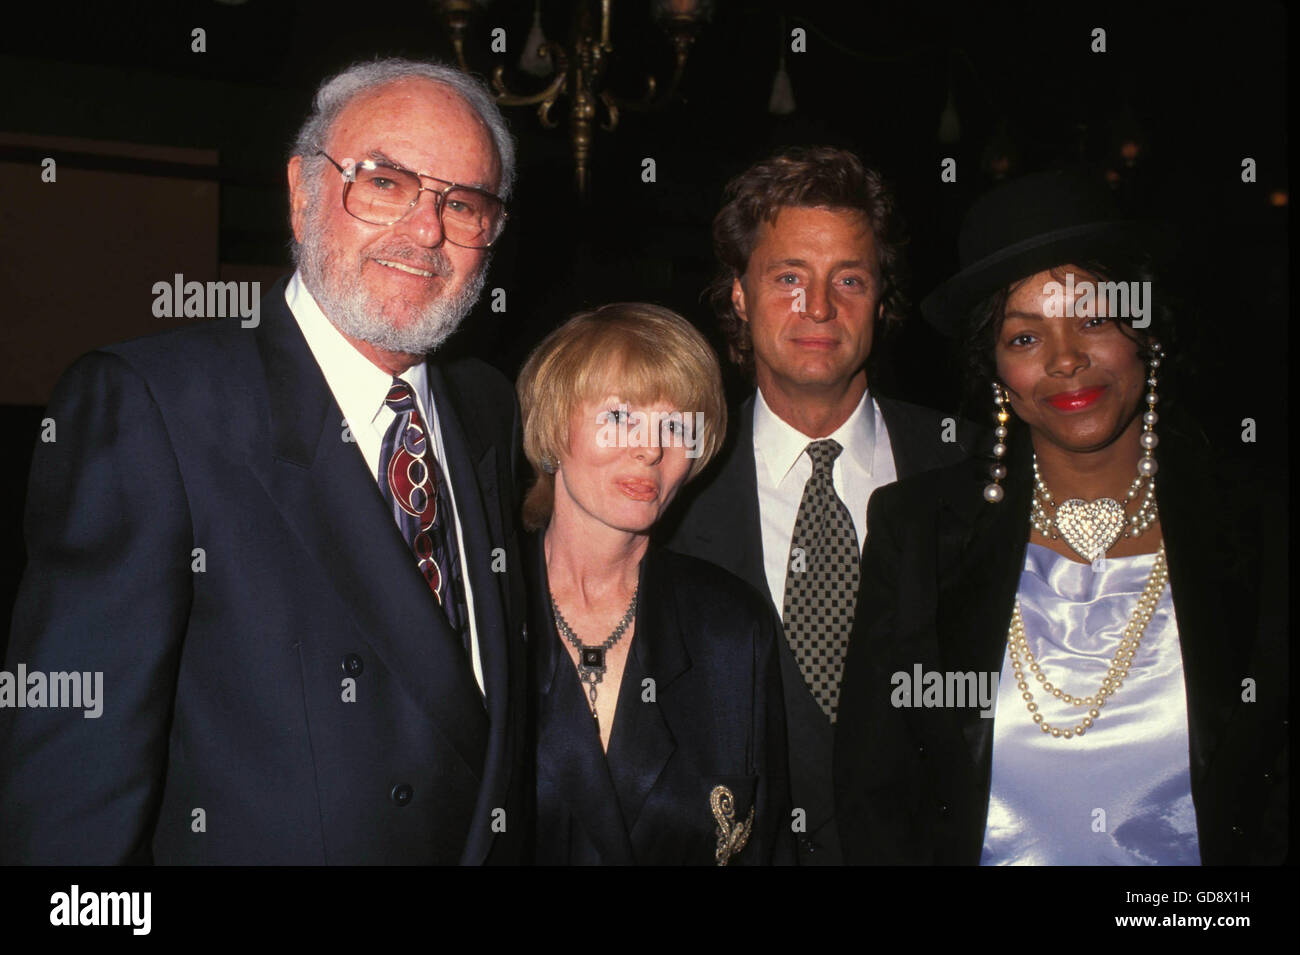 May 30, 2008 - HARVEY KORMAN WITH HIS WIFE DEBORAH FRITZ, SHADOE STEVENS AND WIFE BEVERLY CUNNINGHAM AT NORBY WALTERS' HOLIDAY PARTY, TATOU IN BEVERLY HILLS, CALIFORNIA 11-21-1994. - HARVEYKORMANRETRO © Roger Karnbad/ZUMA Wire/Alamy Live News Stock Photo